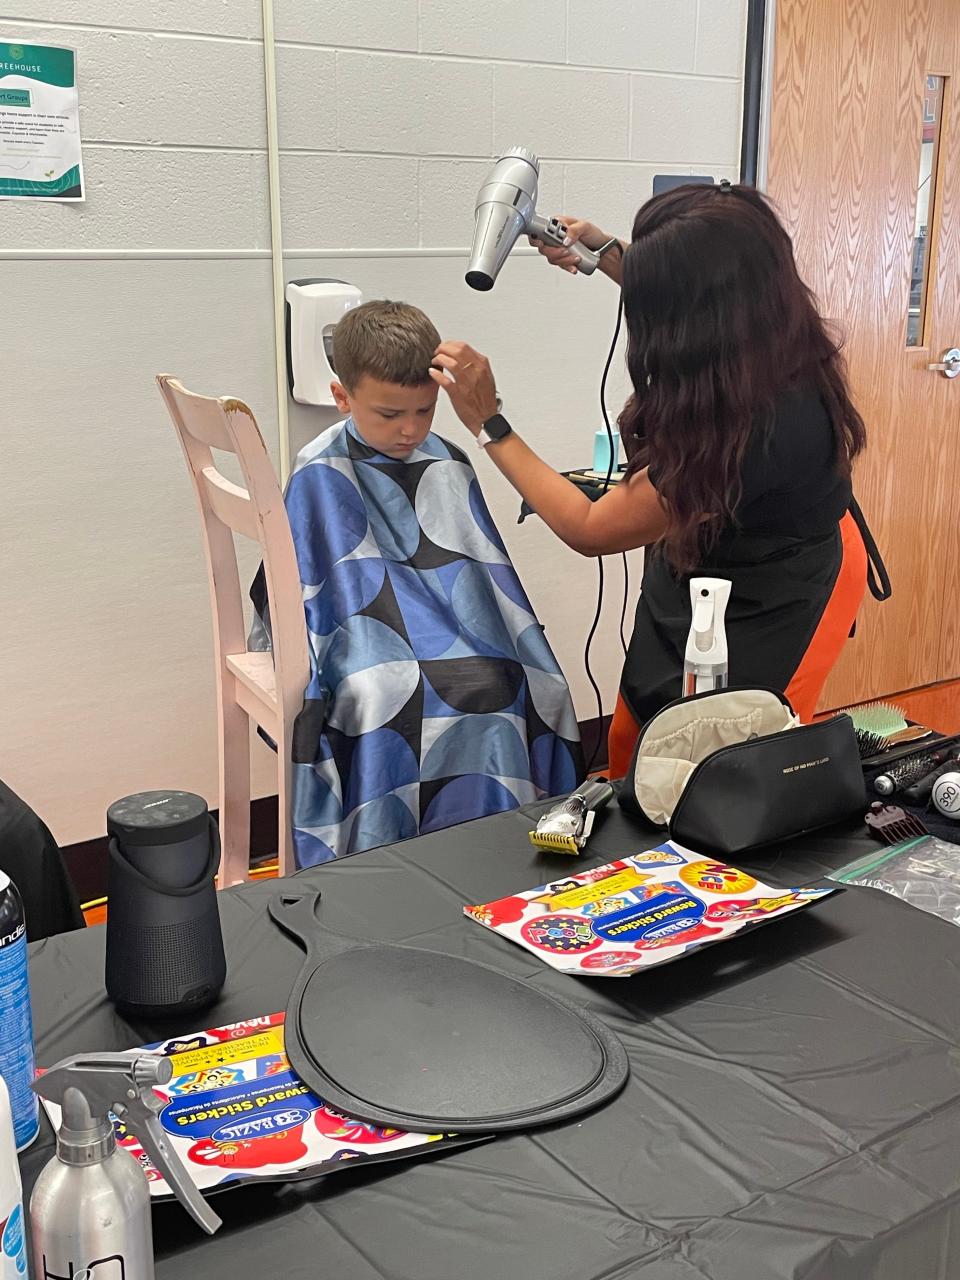 Over 500 families with students in the Pennsbury School District gathered Monday at Pennwood Middle School for a back-to-school event to give children a great start to the academic year. Community groups and businesses donated thousands of dollars in food, supplies and services to students.